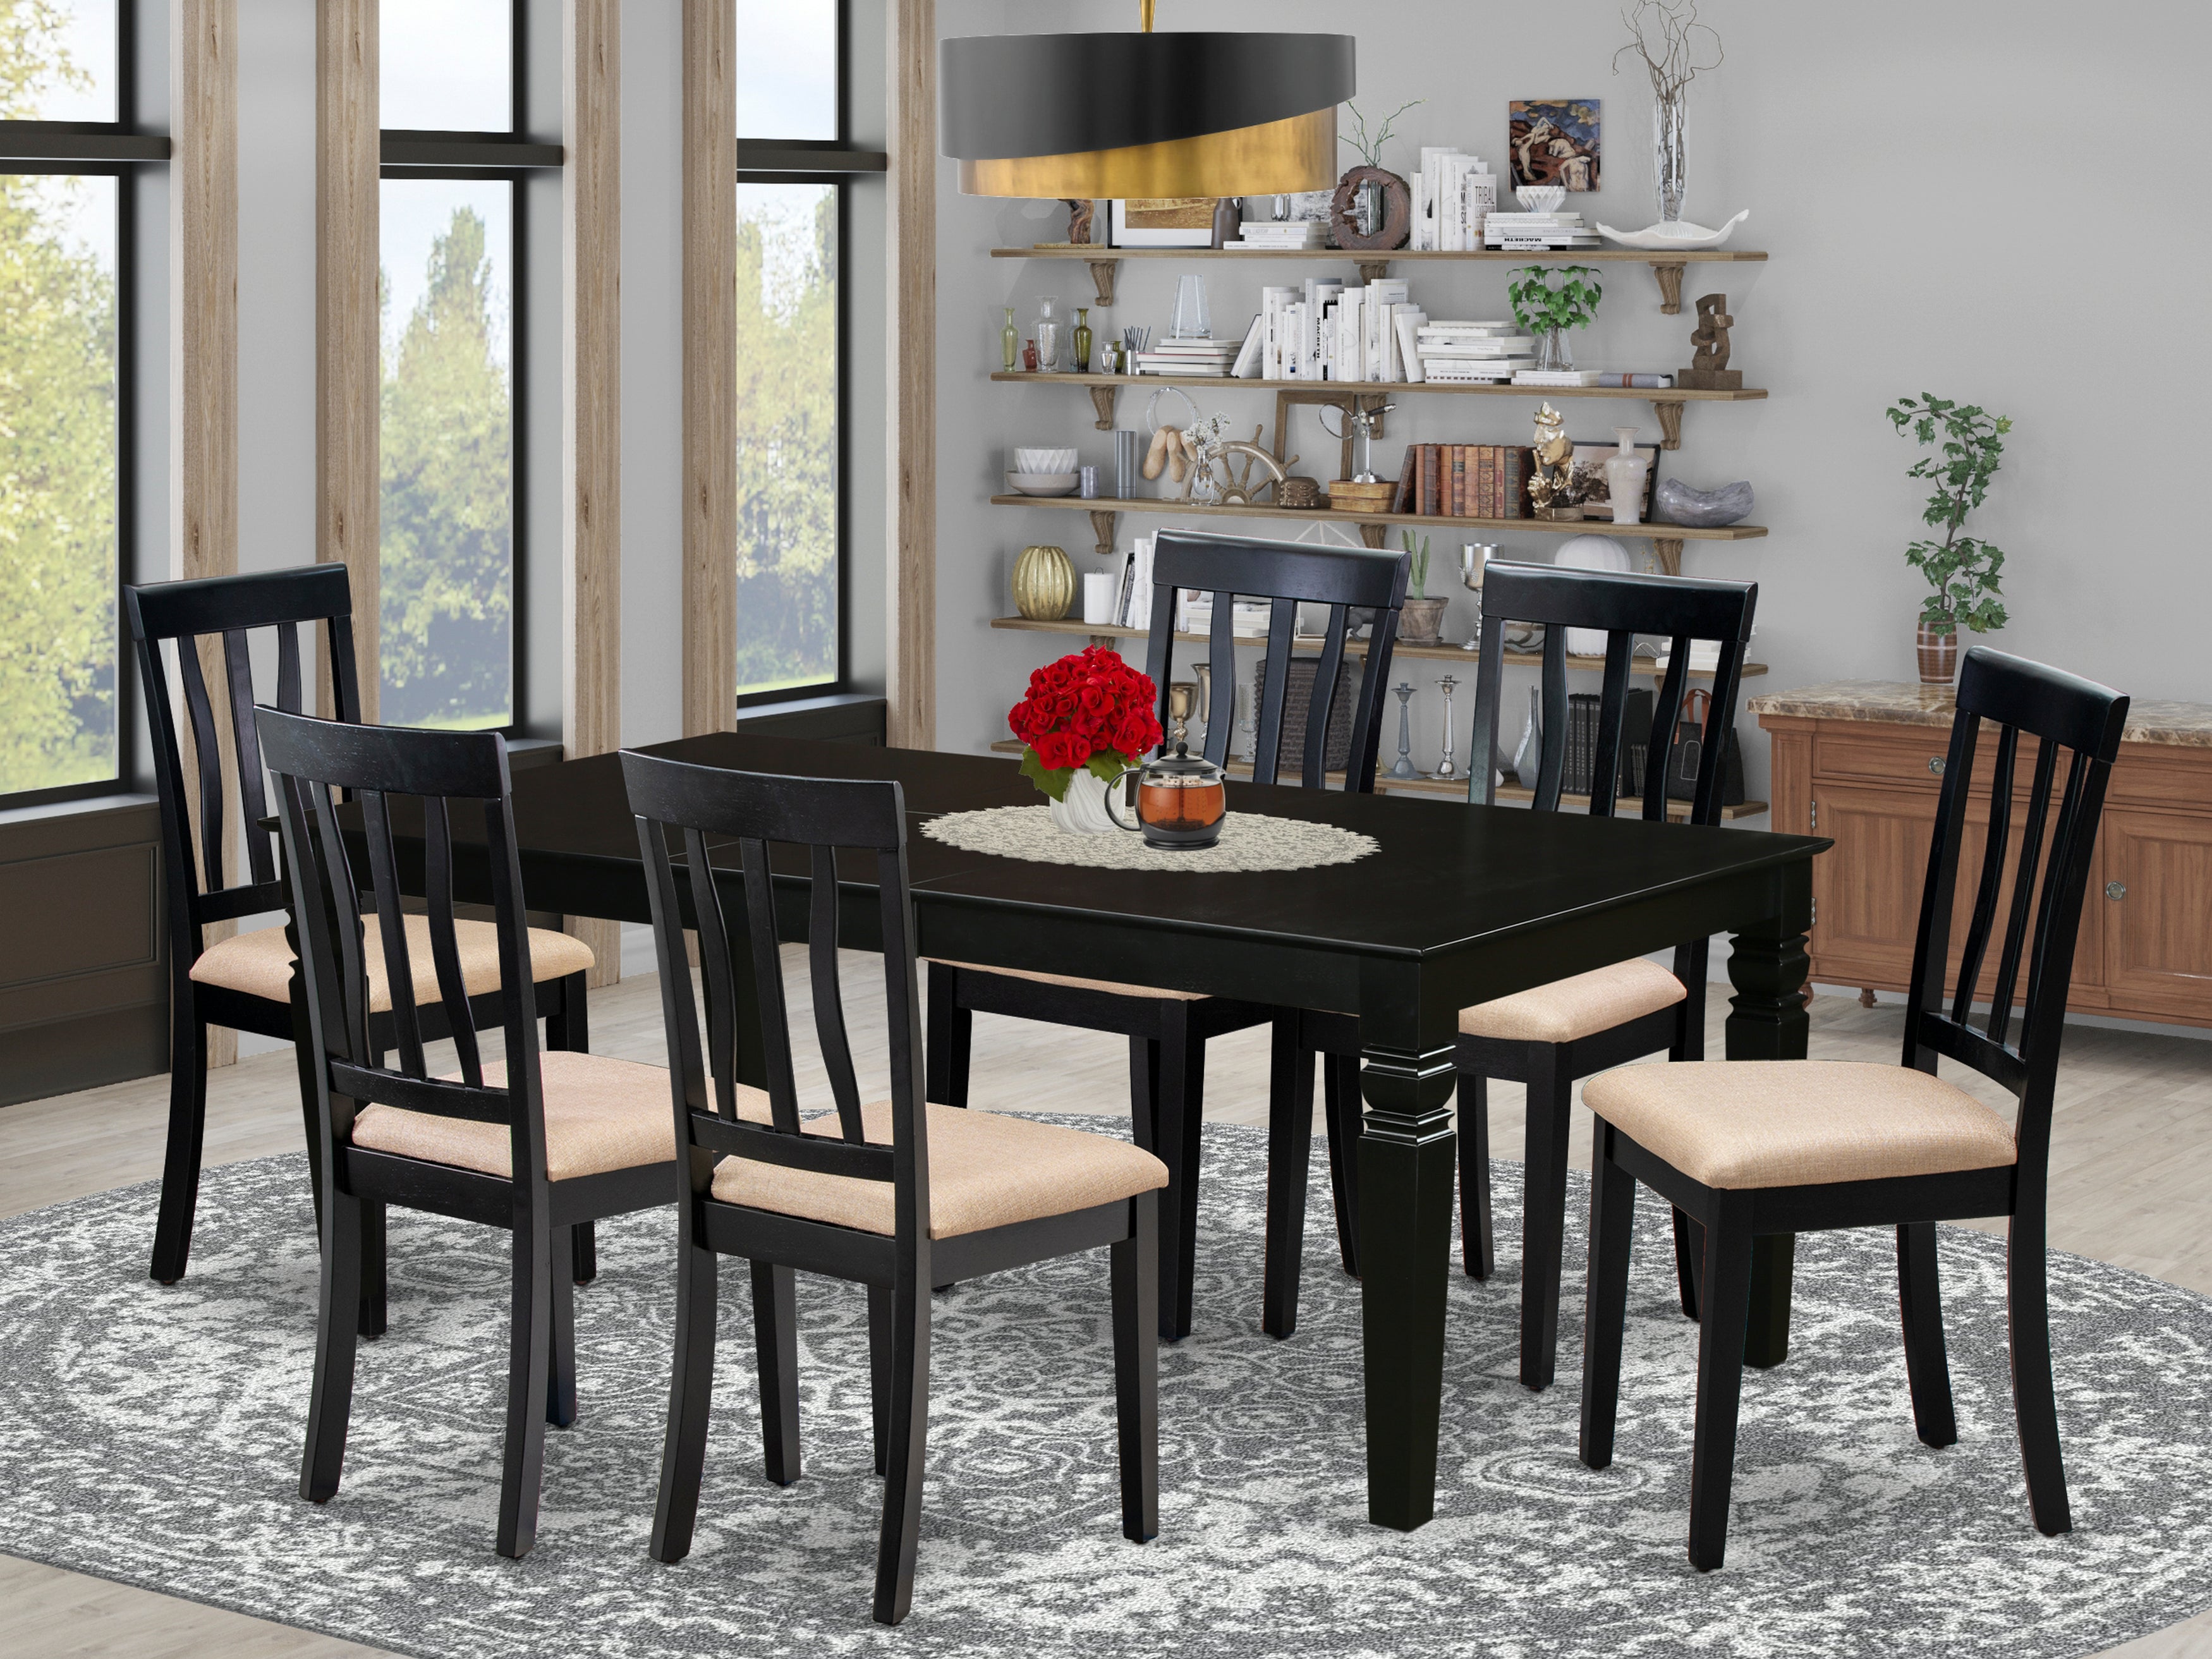 LGAN7-BLK-C 7 Pc Dining Room set with a Dining Table and 6 Microfiber Dining Chairs in Black